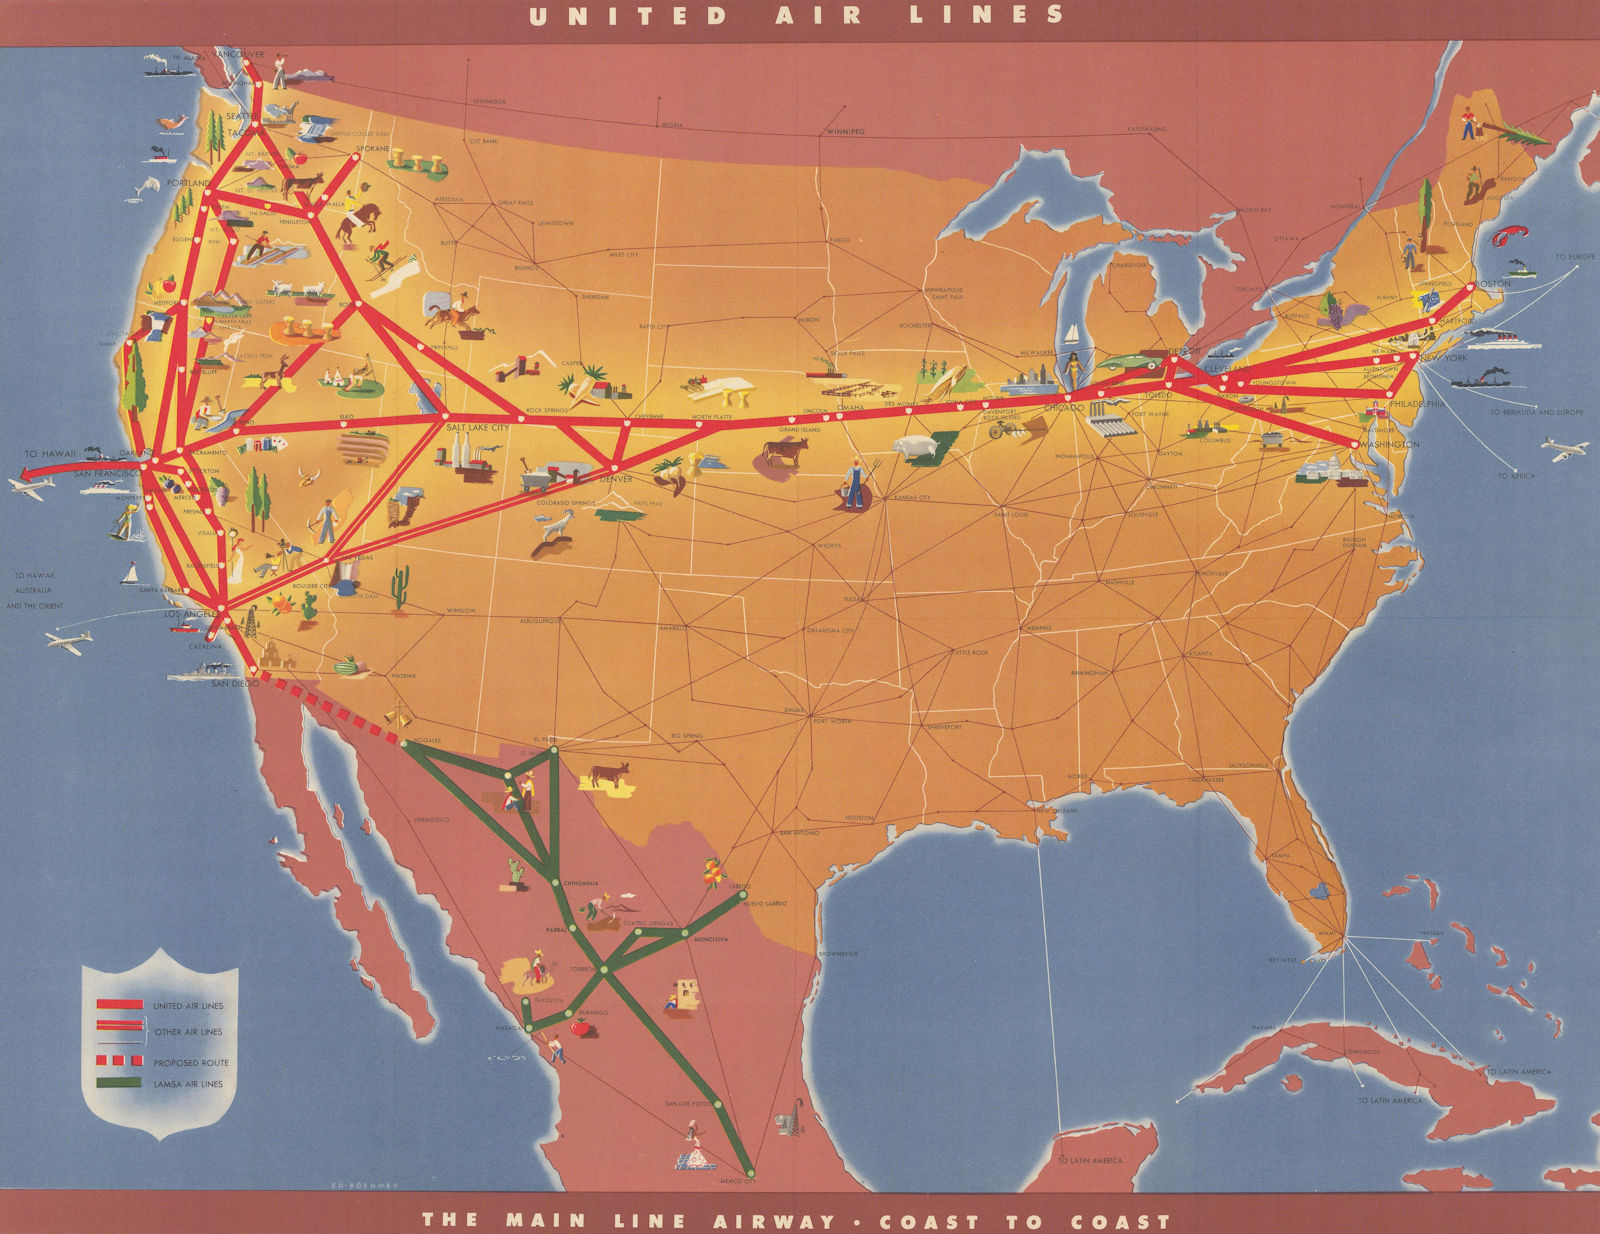 United Air Lines. The main line airway. Pictorial network route map 16"x21" 1946